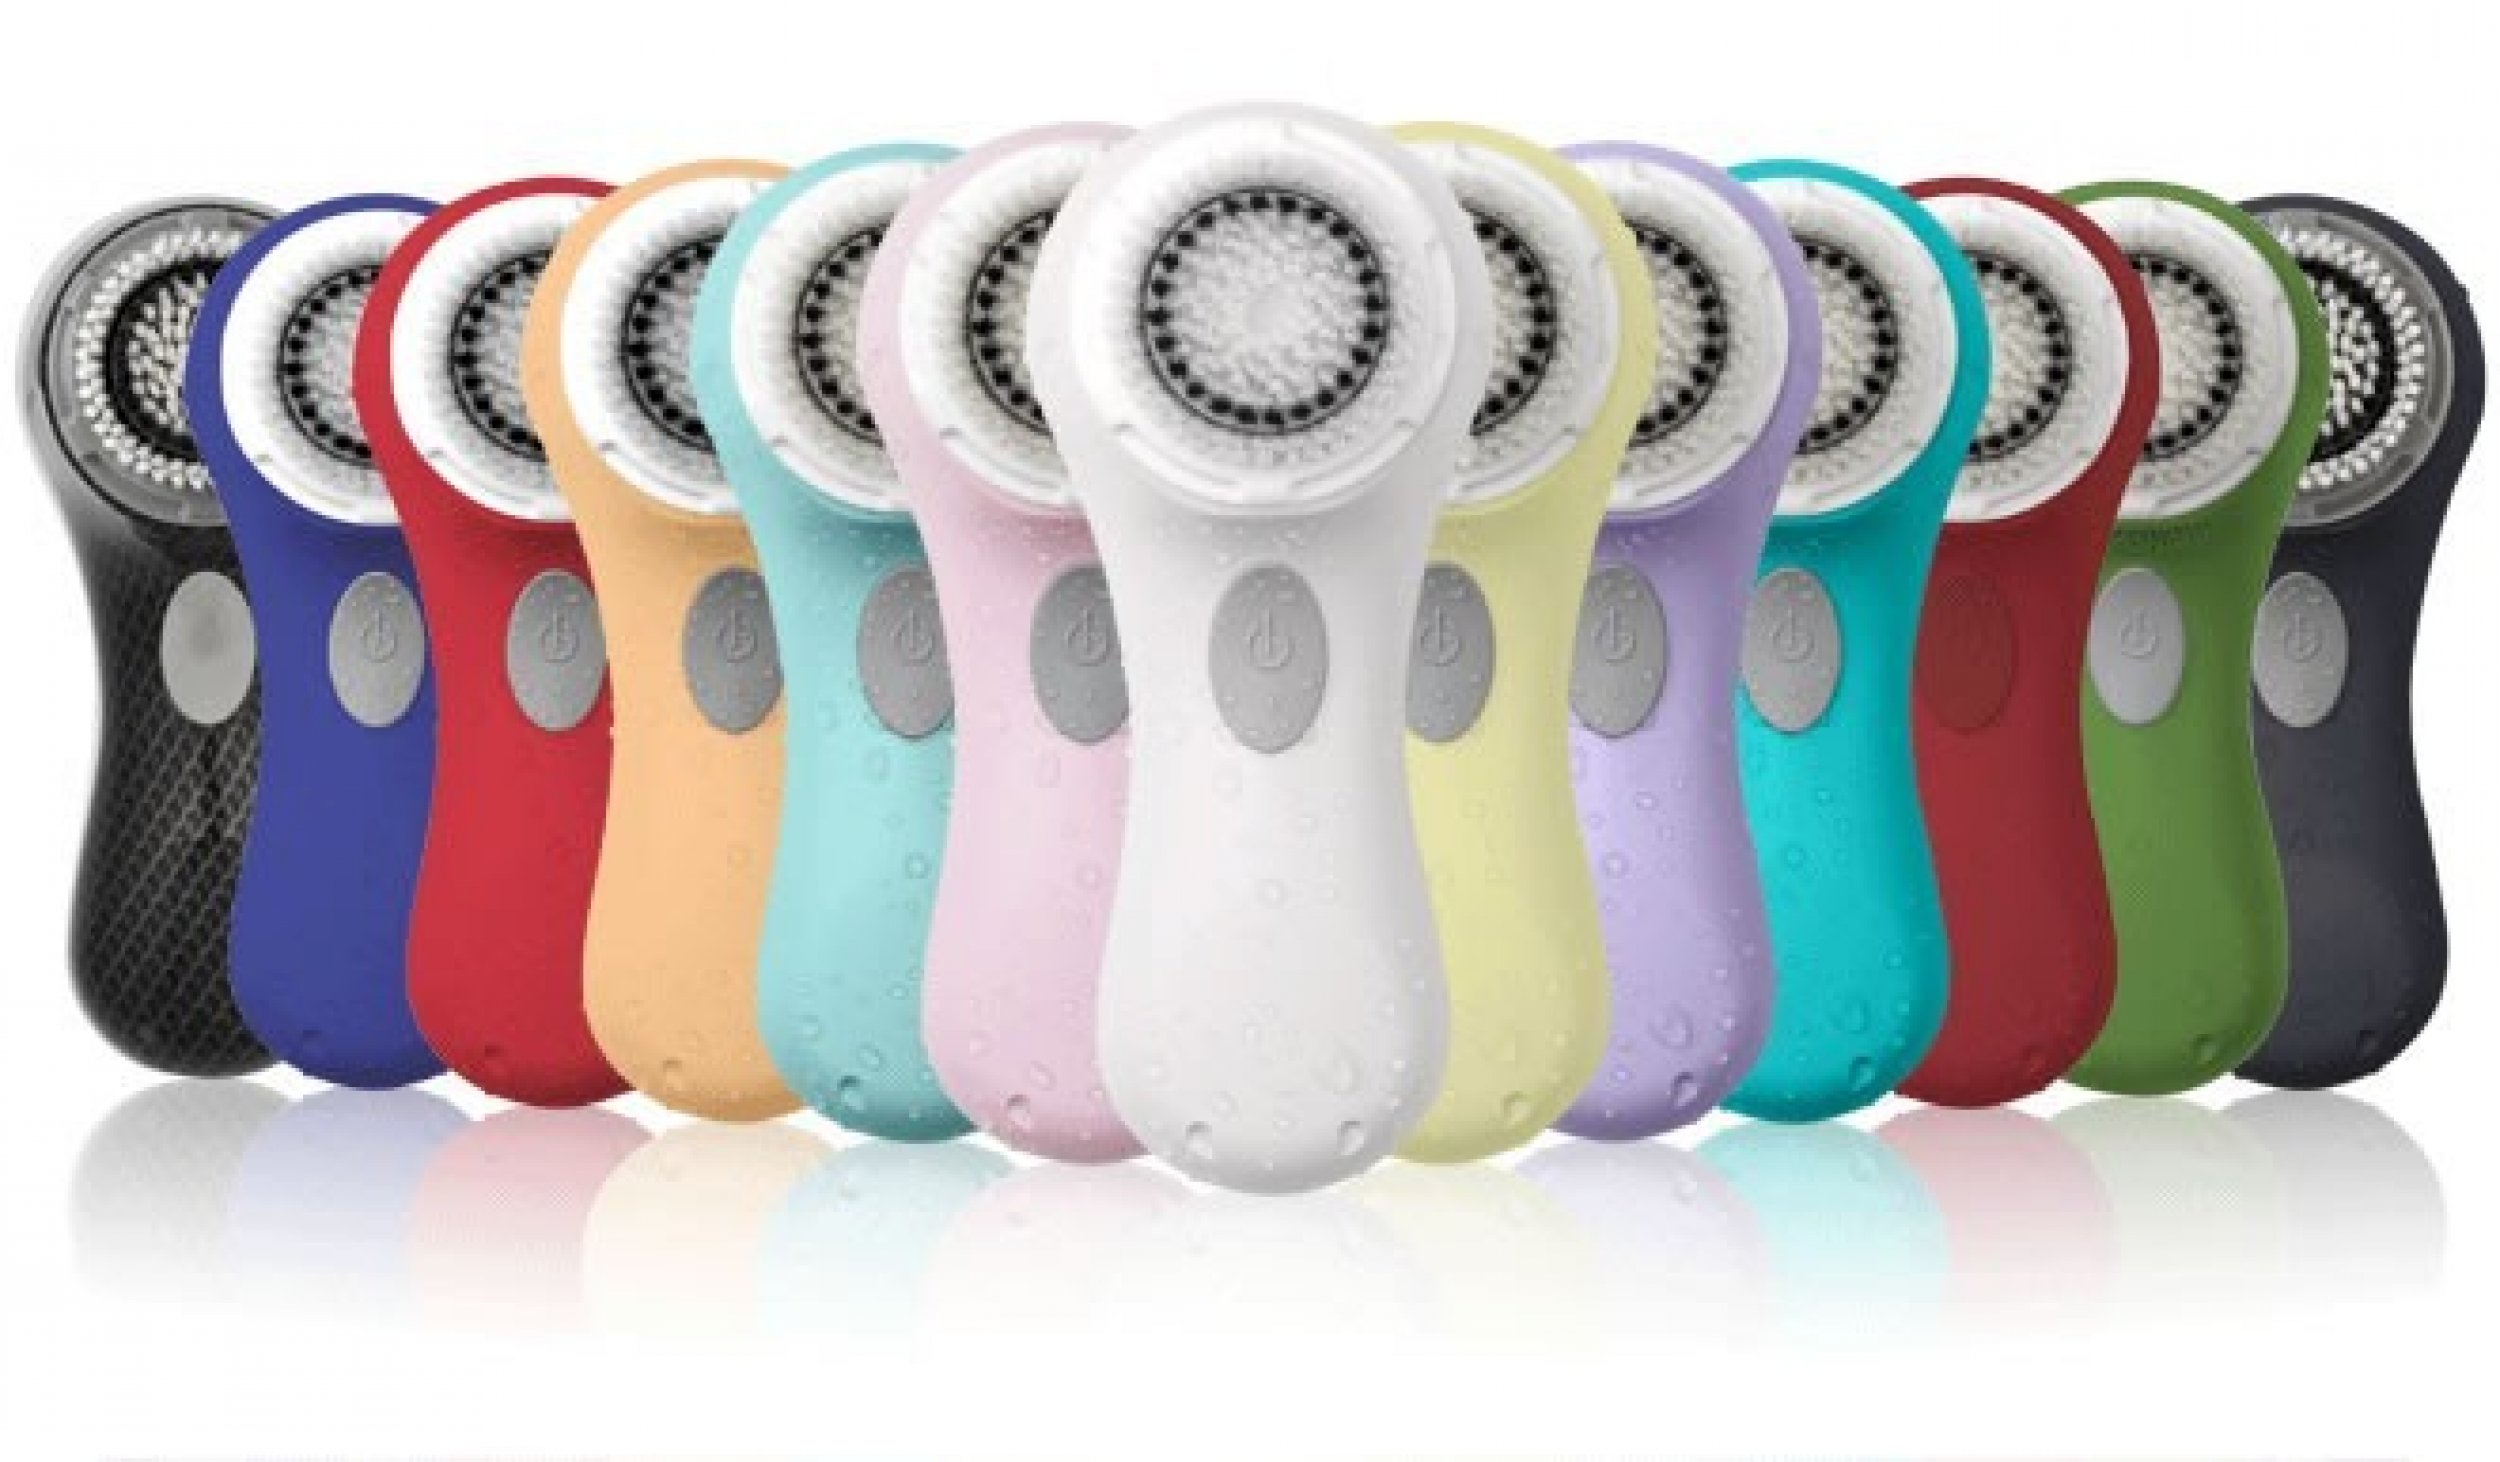 Clarisonic Skin Cleansing System